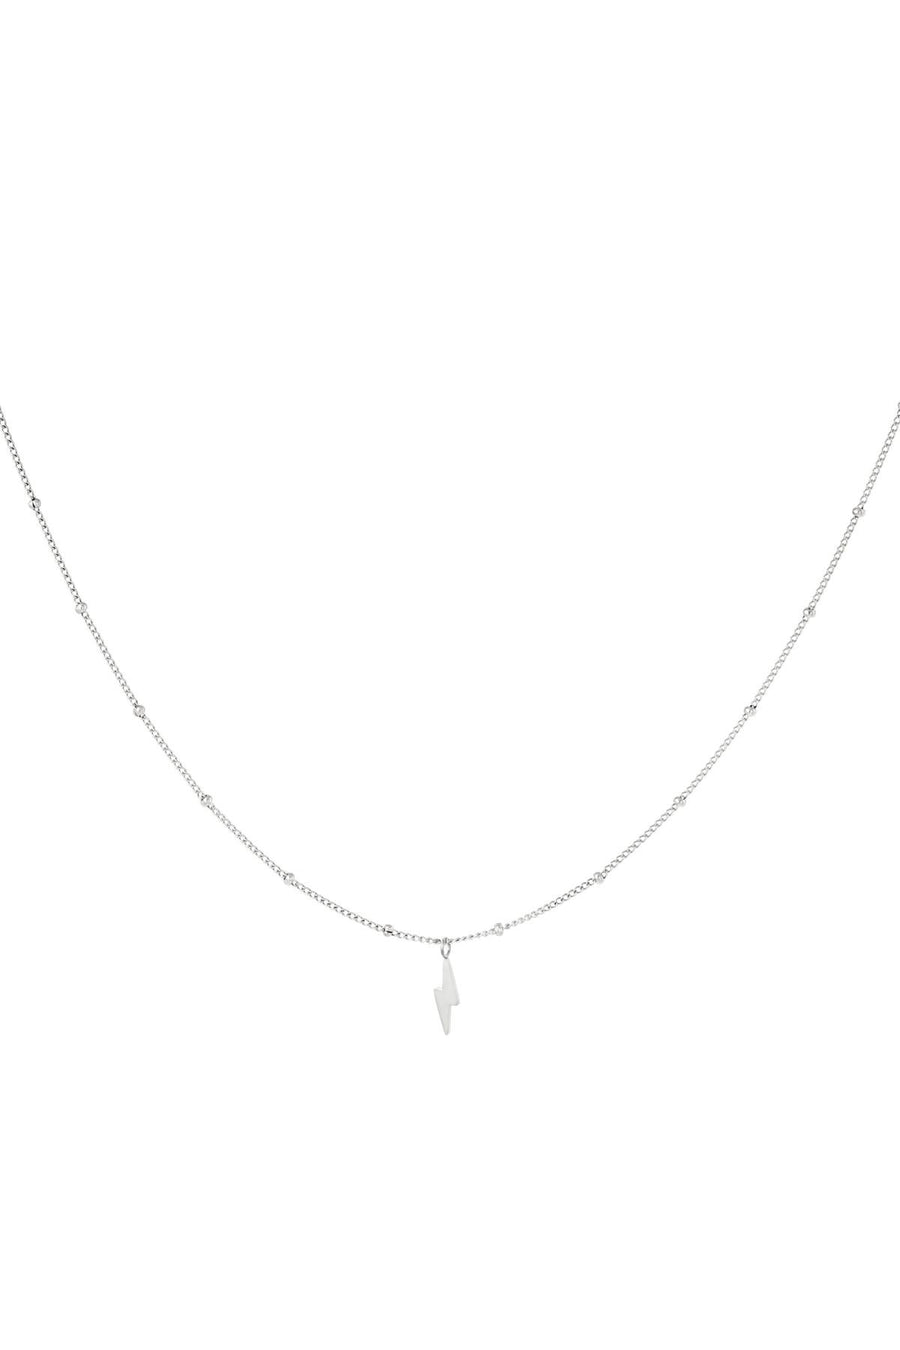 Lightning Bolt  Necklace- Gold & Silver Available